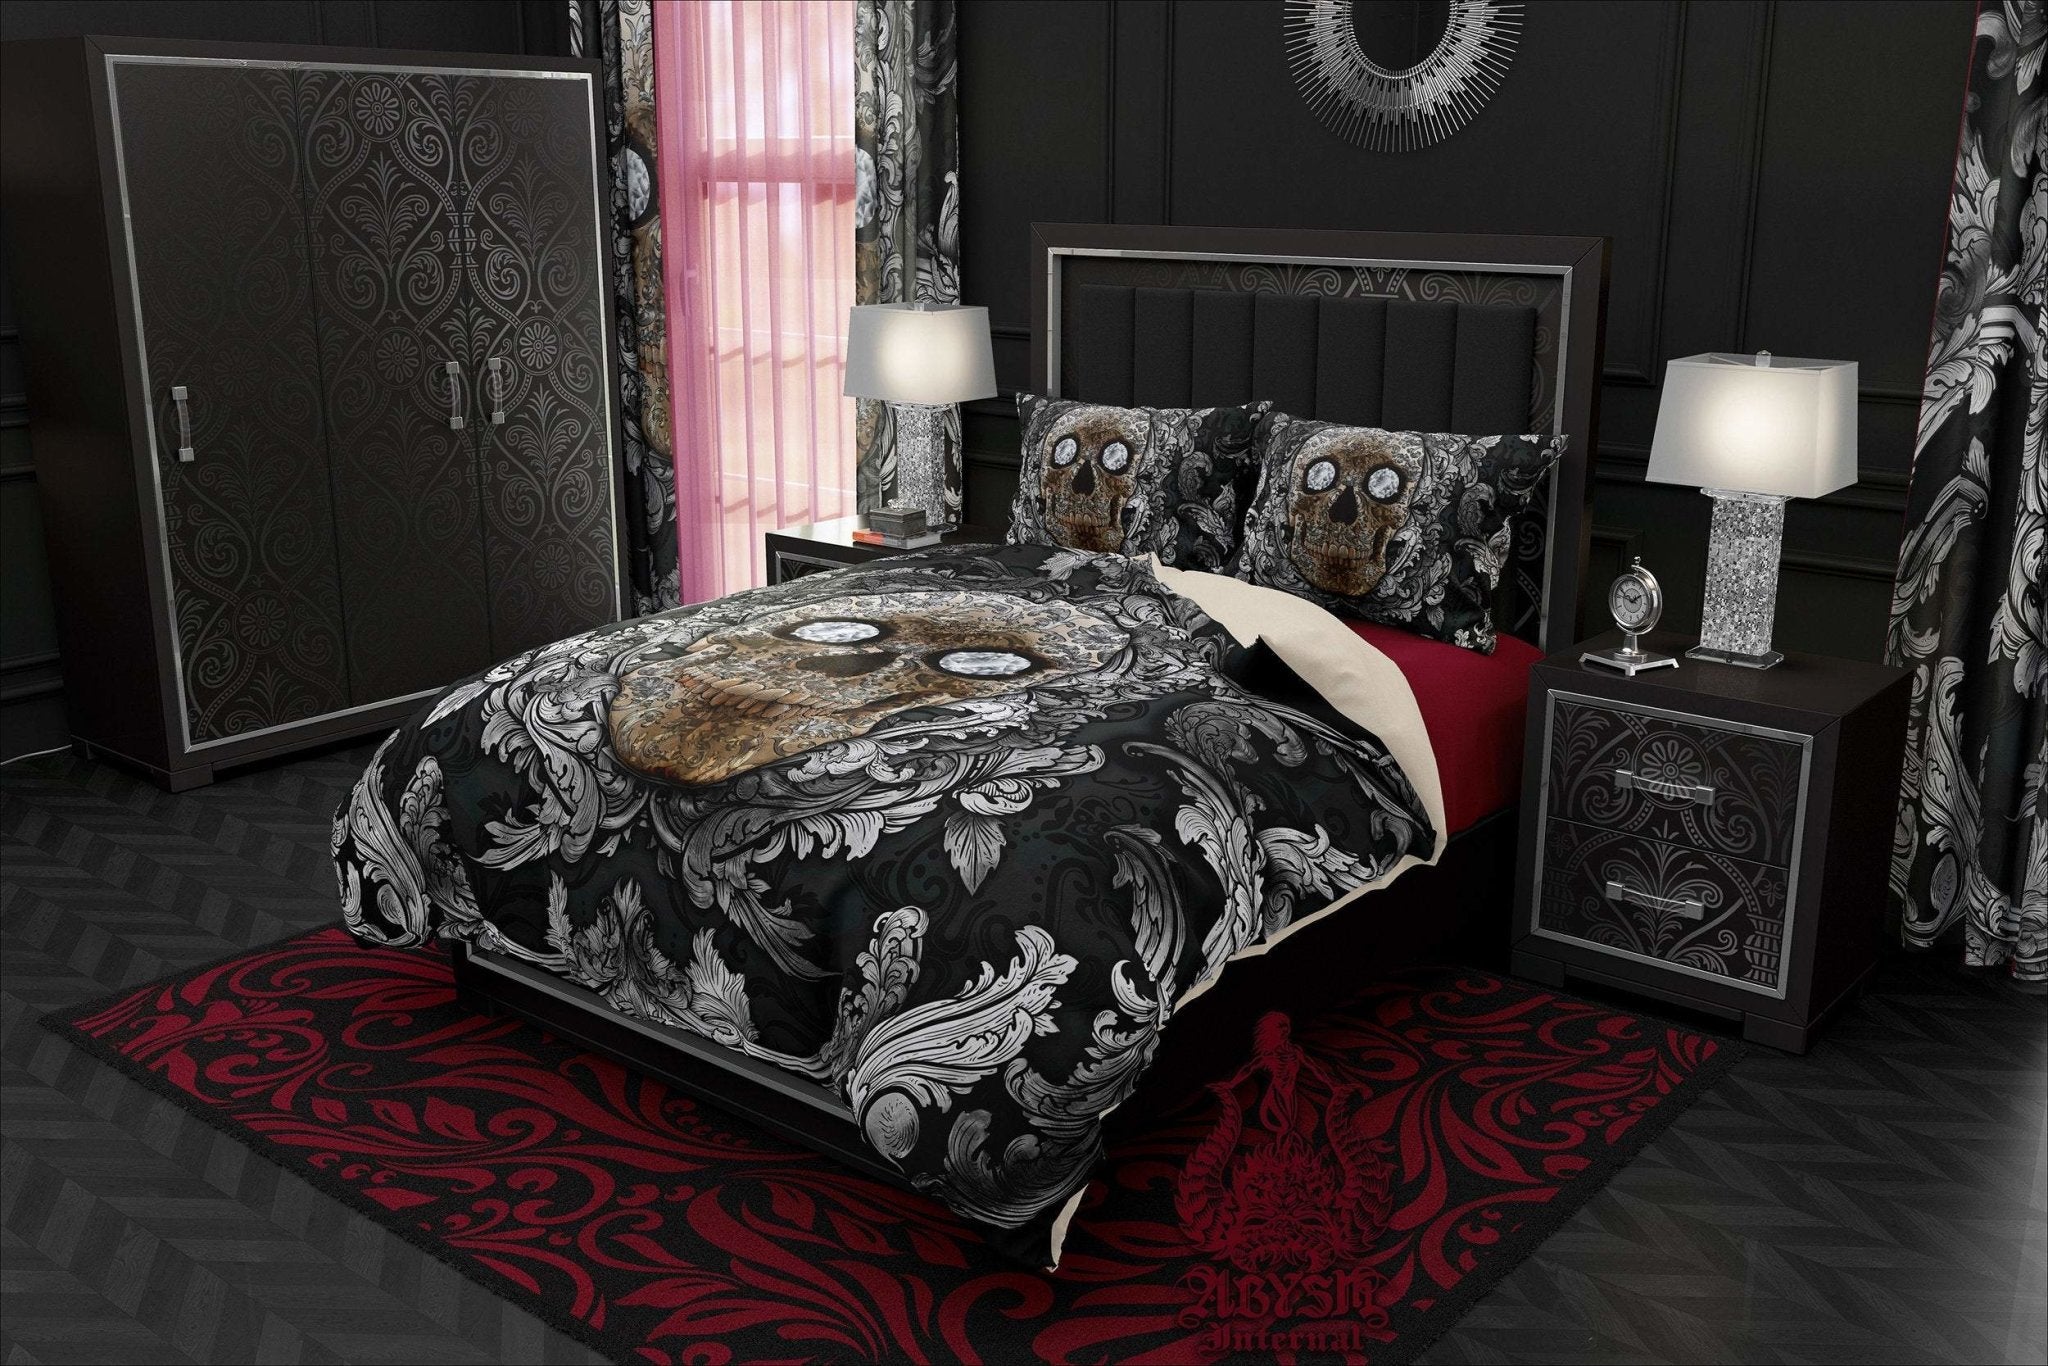 Skull Bedding Set, Comforter and Duvet, Victorian Goth Bed Cover and Bedroom Decor, King, Queen and Twin Size - Silver and Diamonds - Abysm Internal